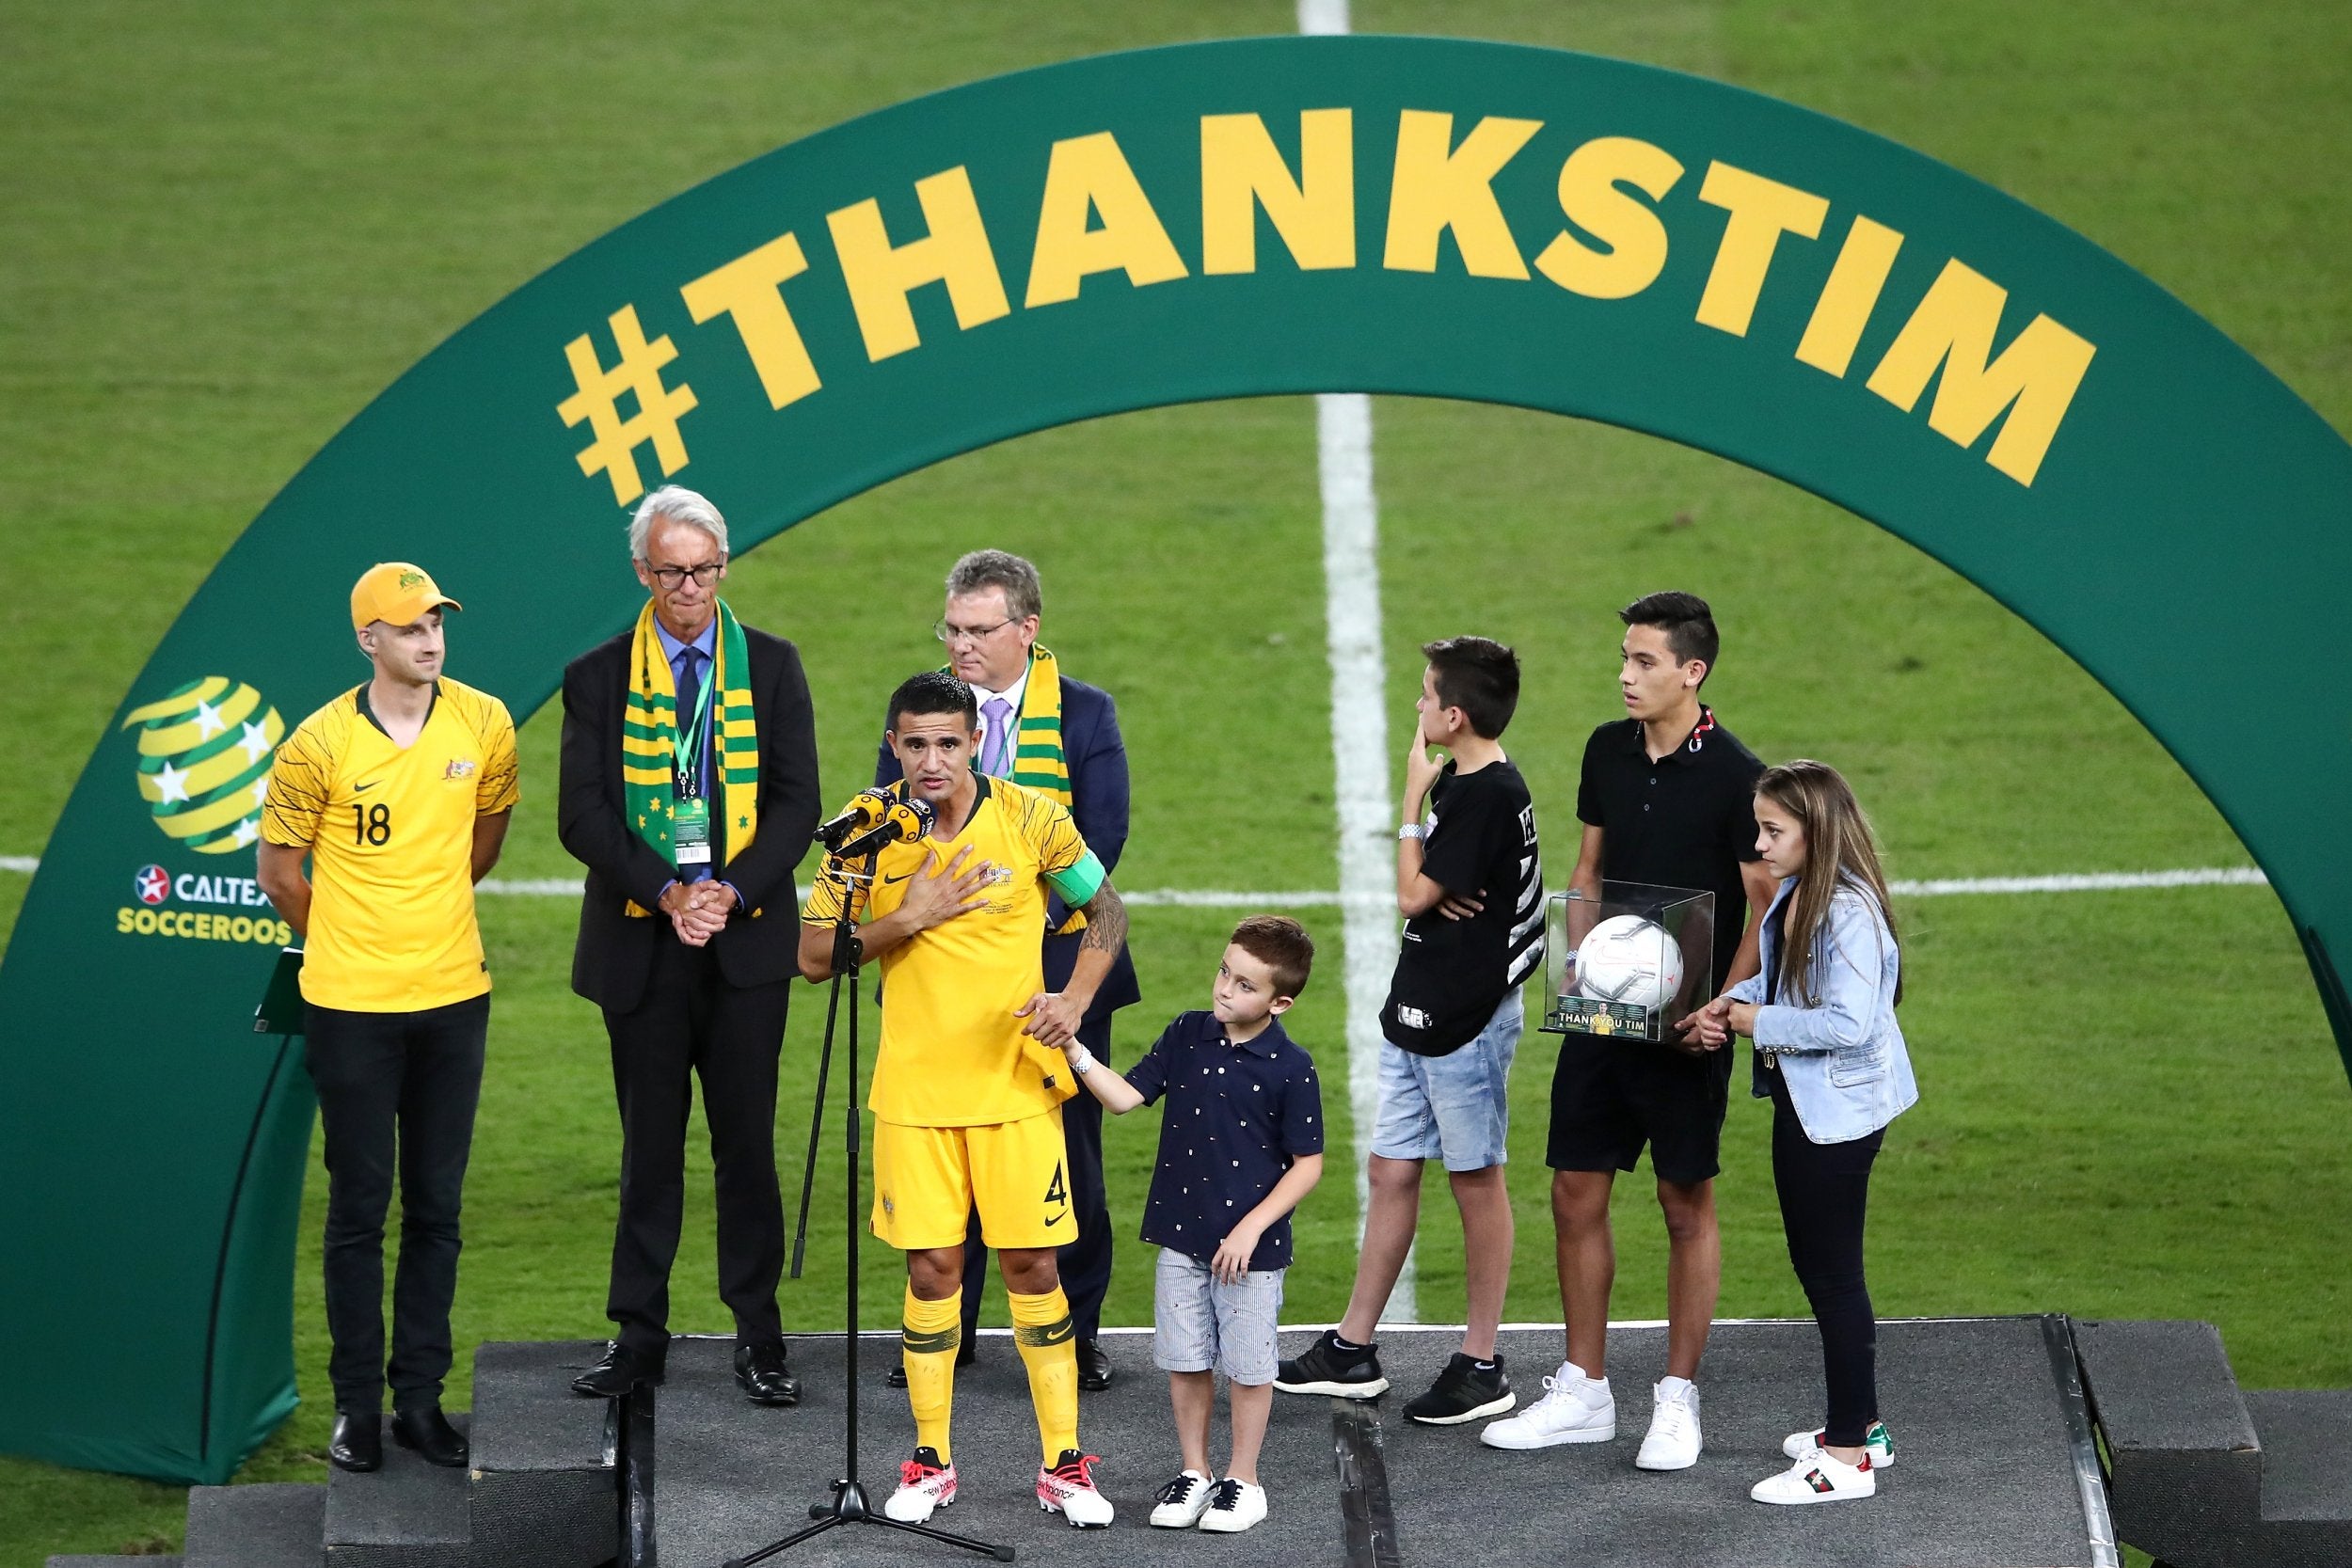 Cahill thanked fans in Sydney